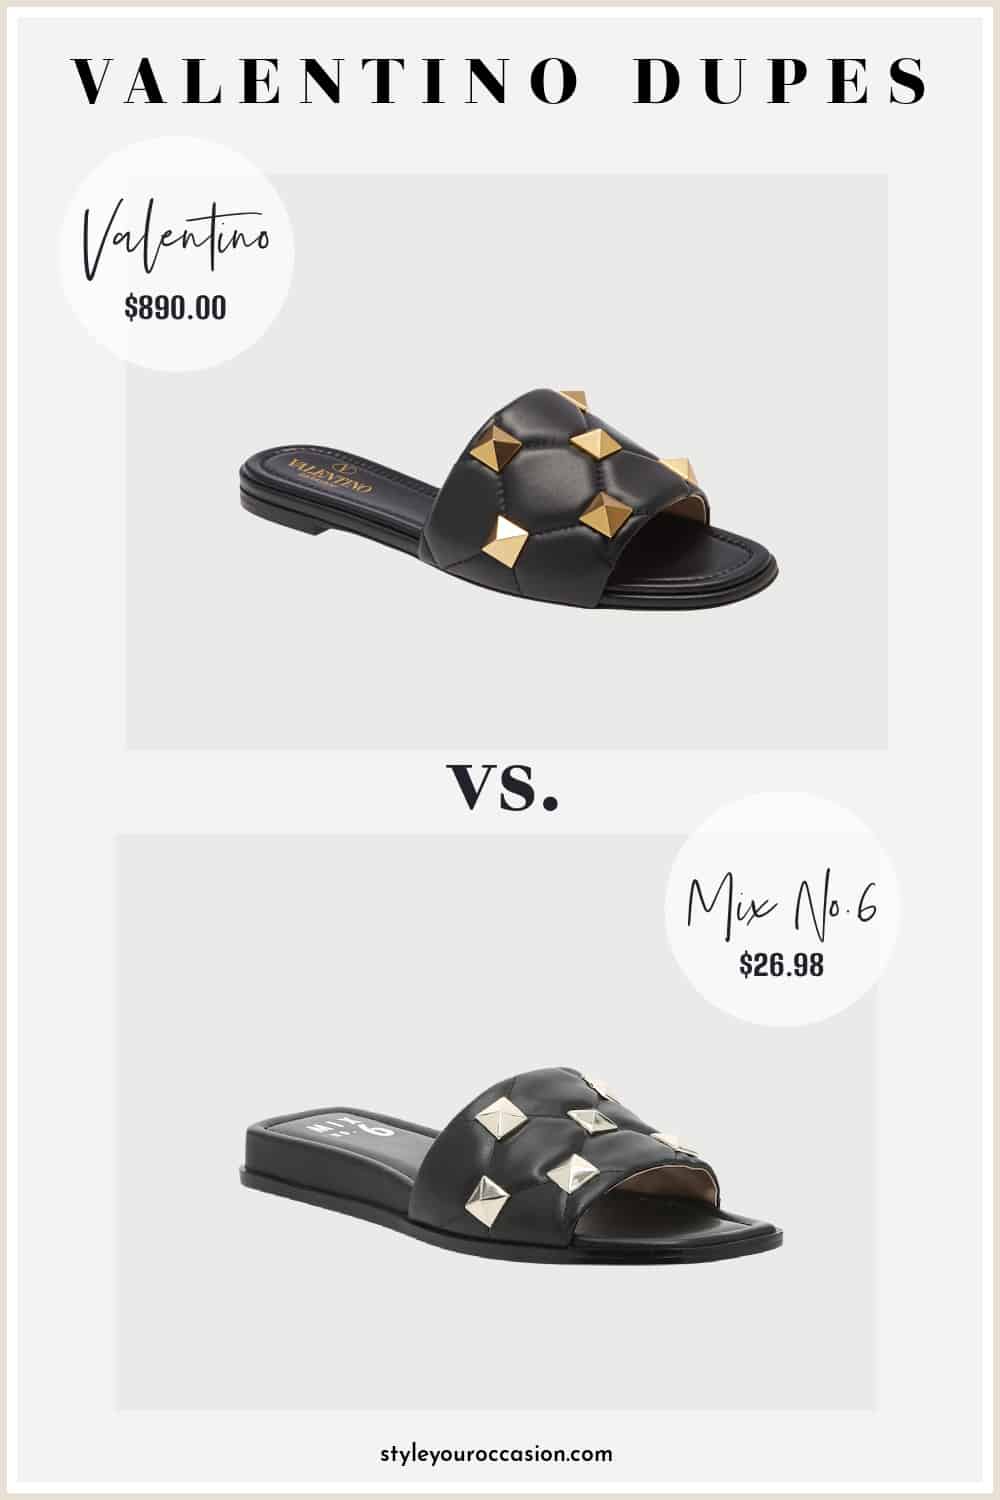 image of a black slide sandal with gold stud details and another sandal that is a dupe